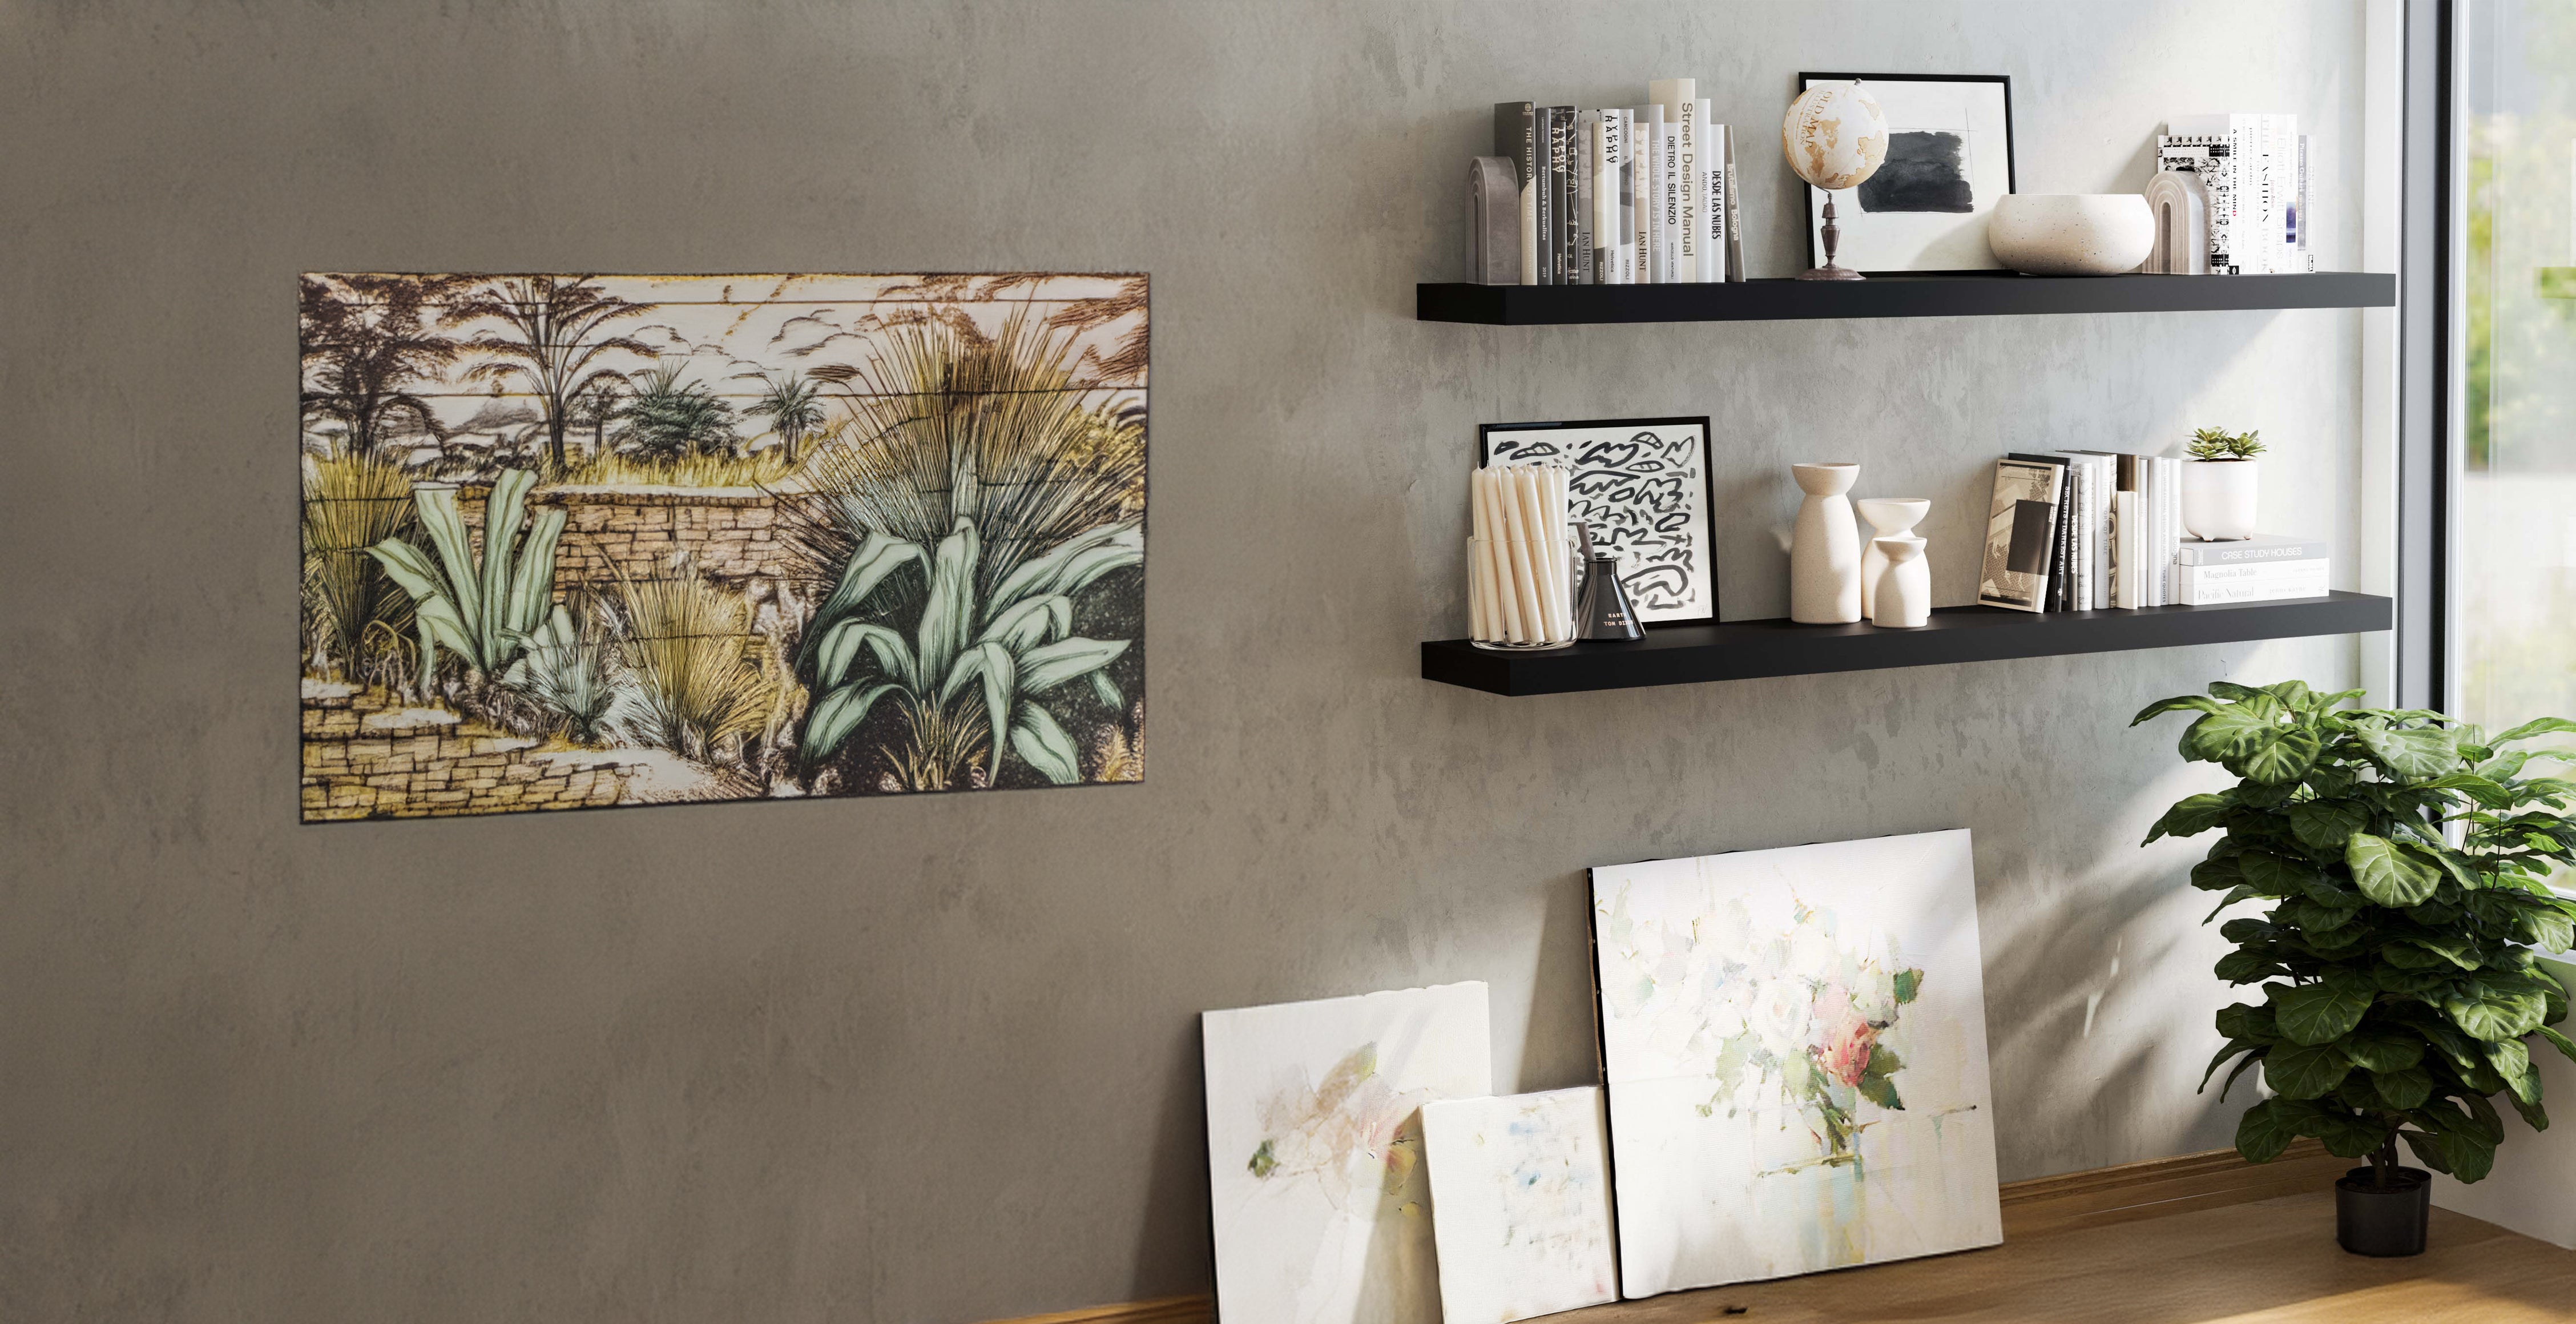 The image features two black floating shelves with invisible brackets on a gray wall. The shelves hold books, decor, and plants, creating a modern look. Below, art canvases and a green plant add style and warmth.